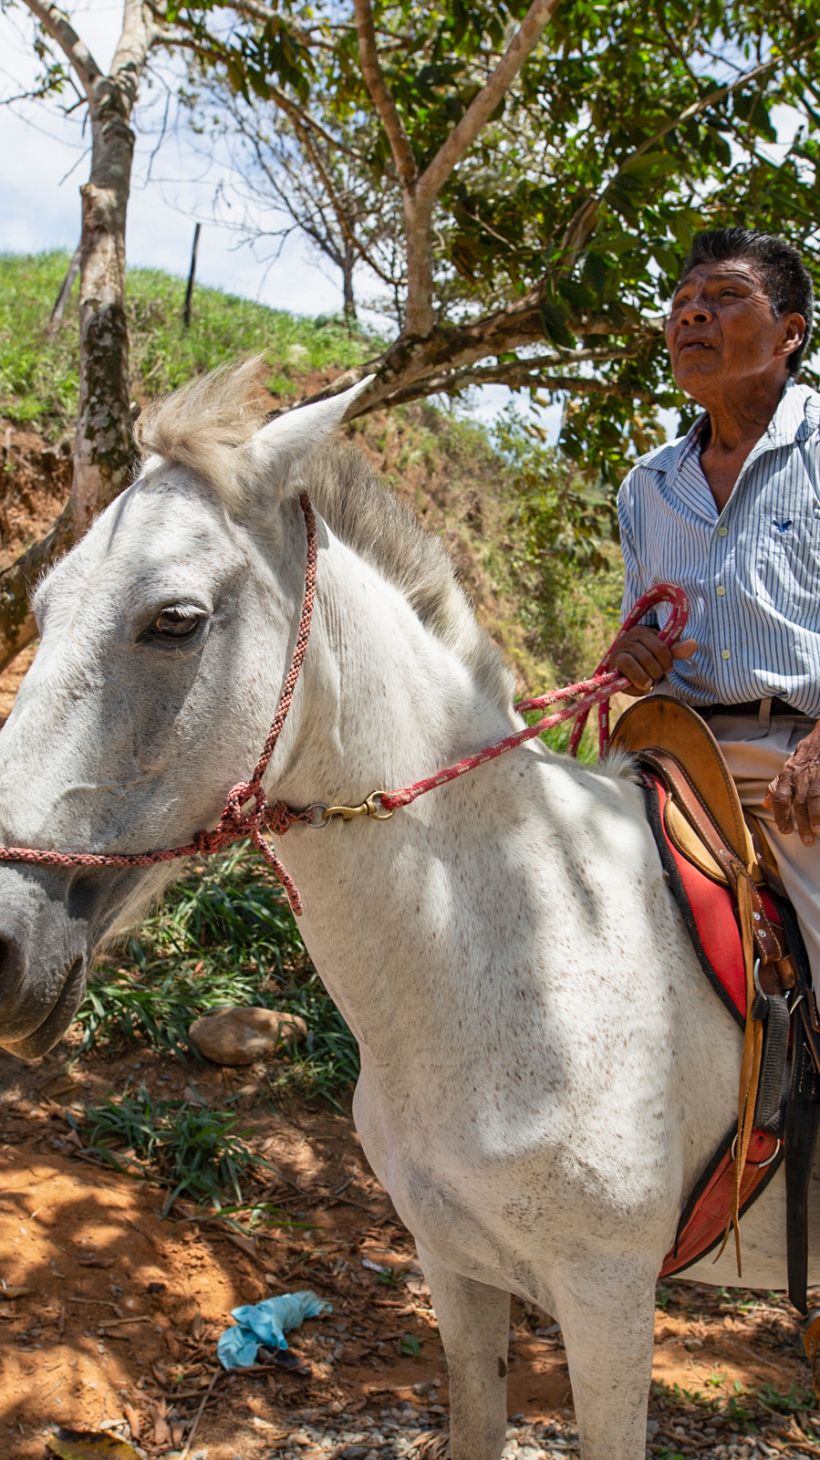 A photo of Santiago Figueroa, 68, on his horse in Salitre.